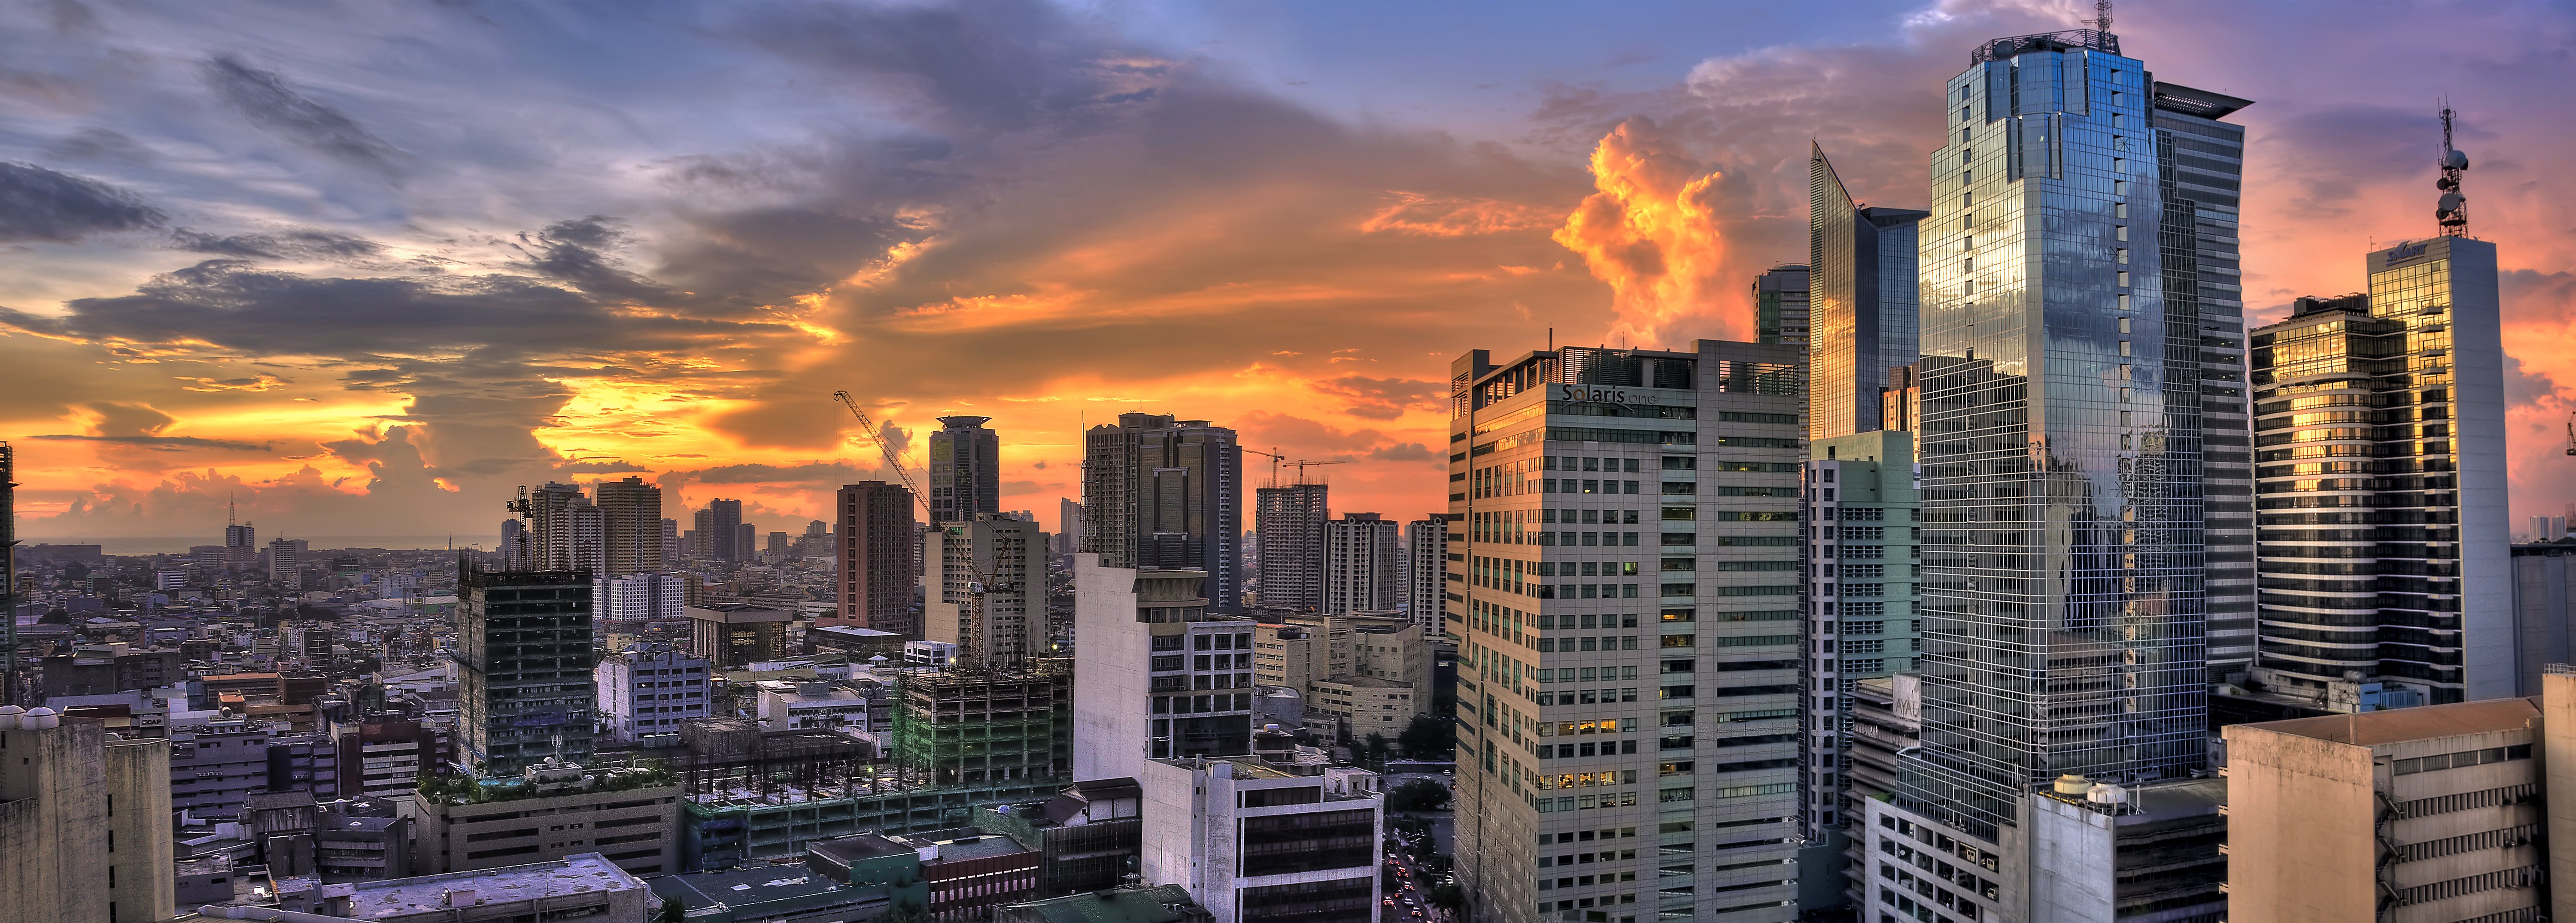 houses, Evening, Philippines, Clouds, Cities Wallpaper